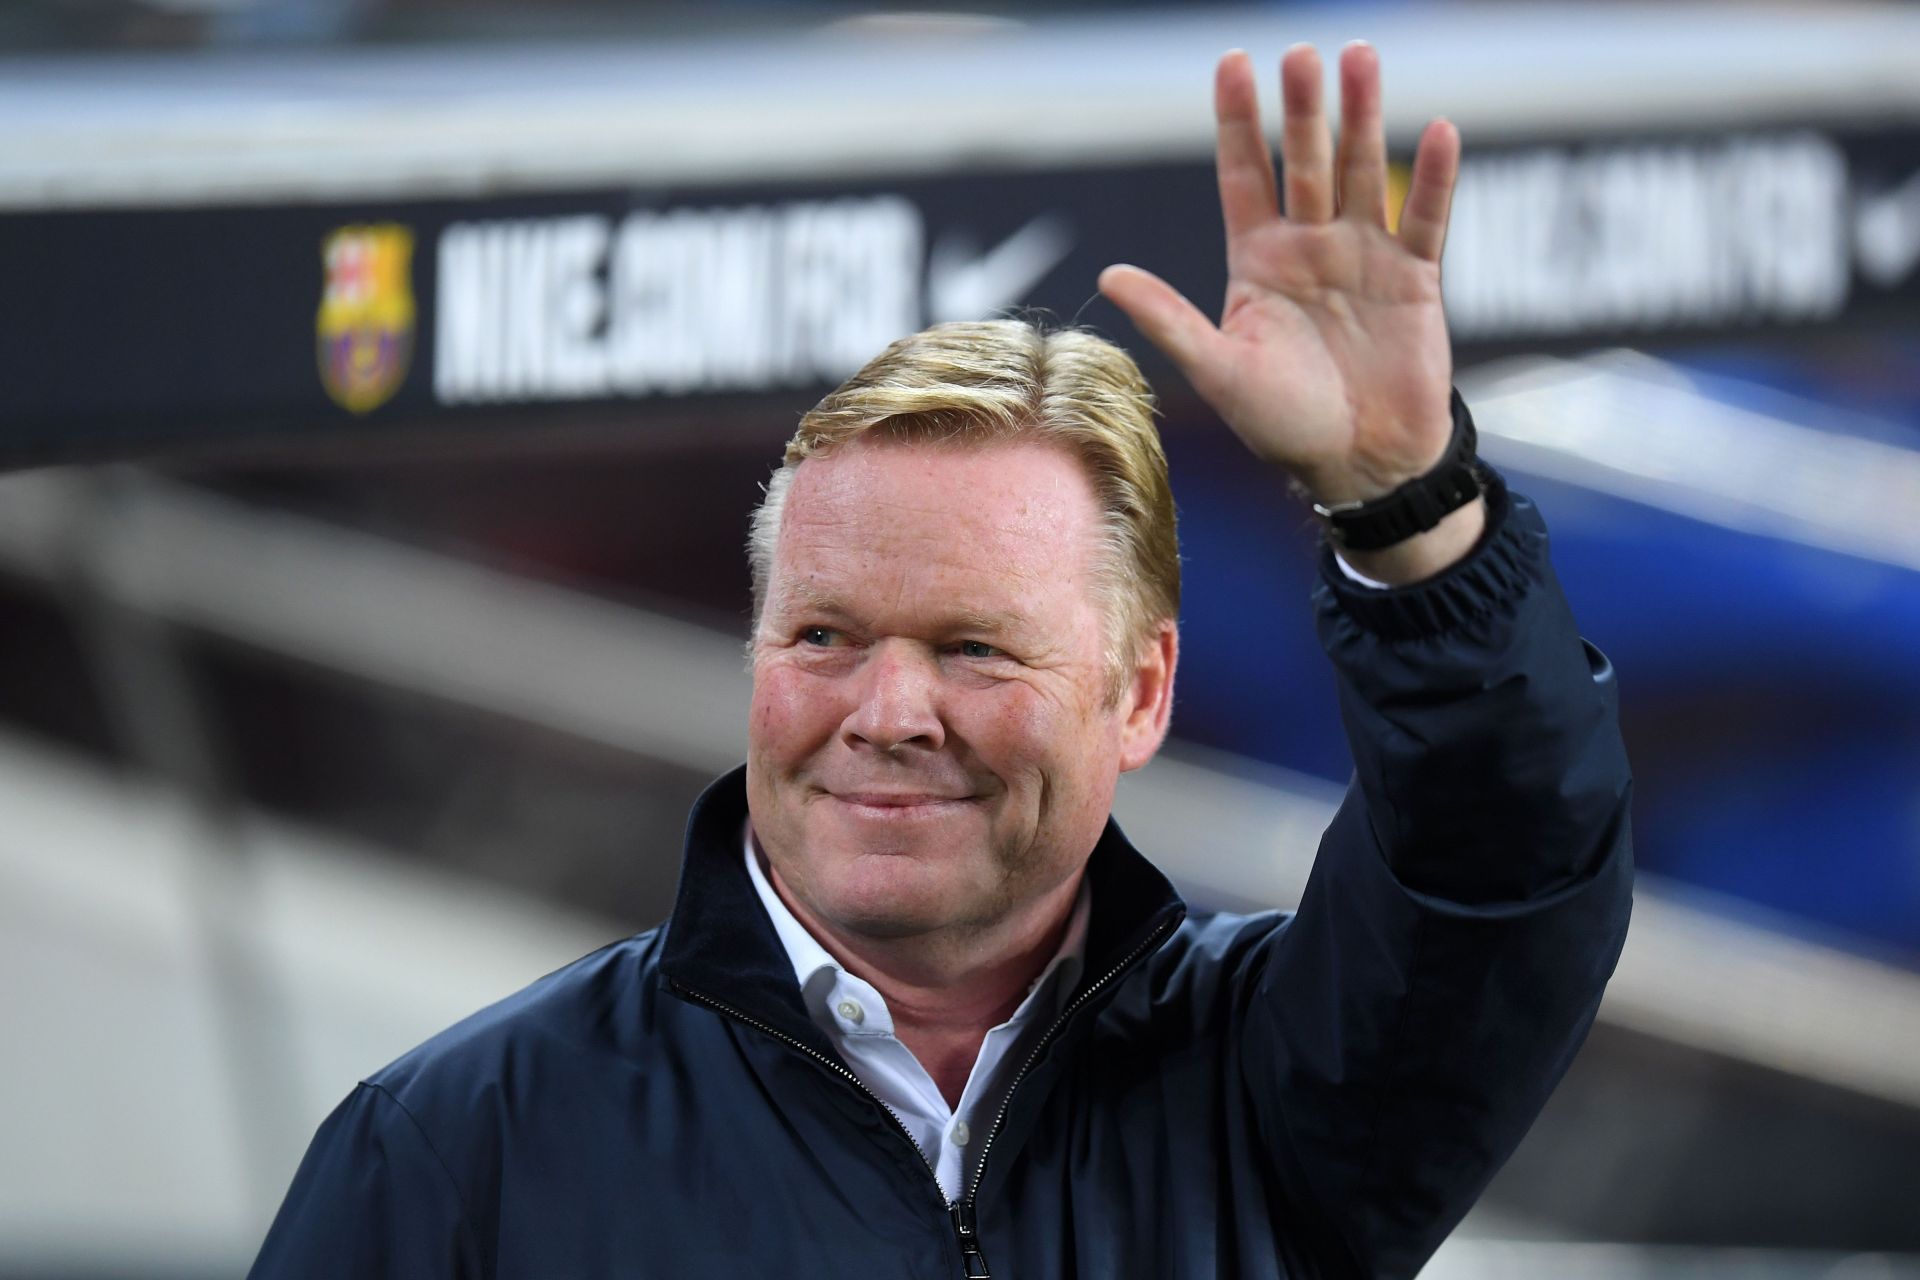 Ronald Koeman was shown the door after a difficult start to the season.